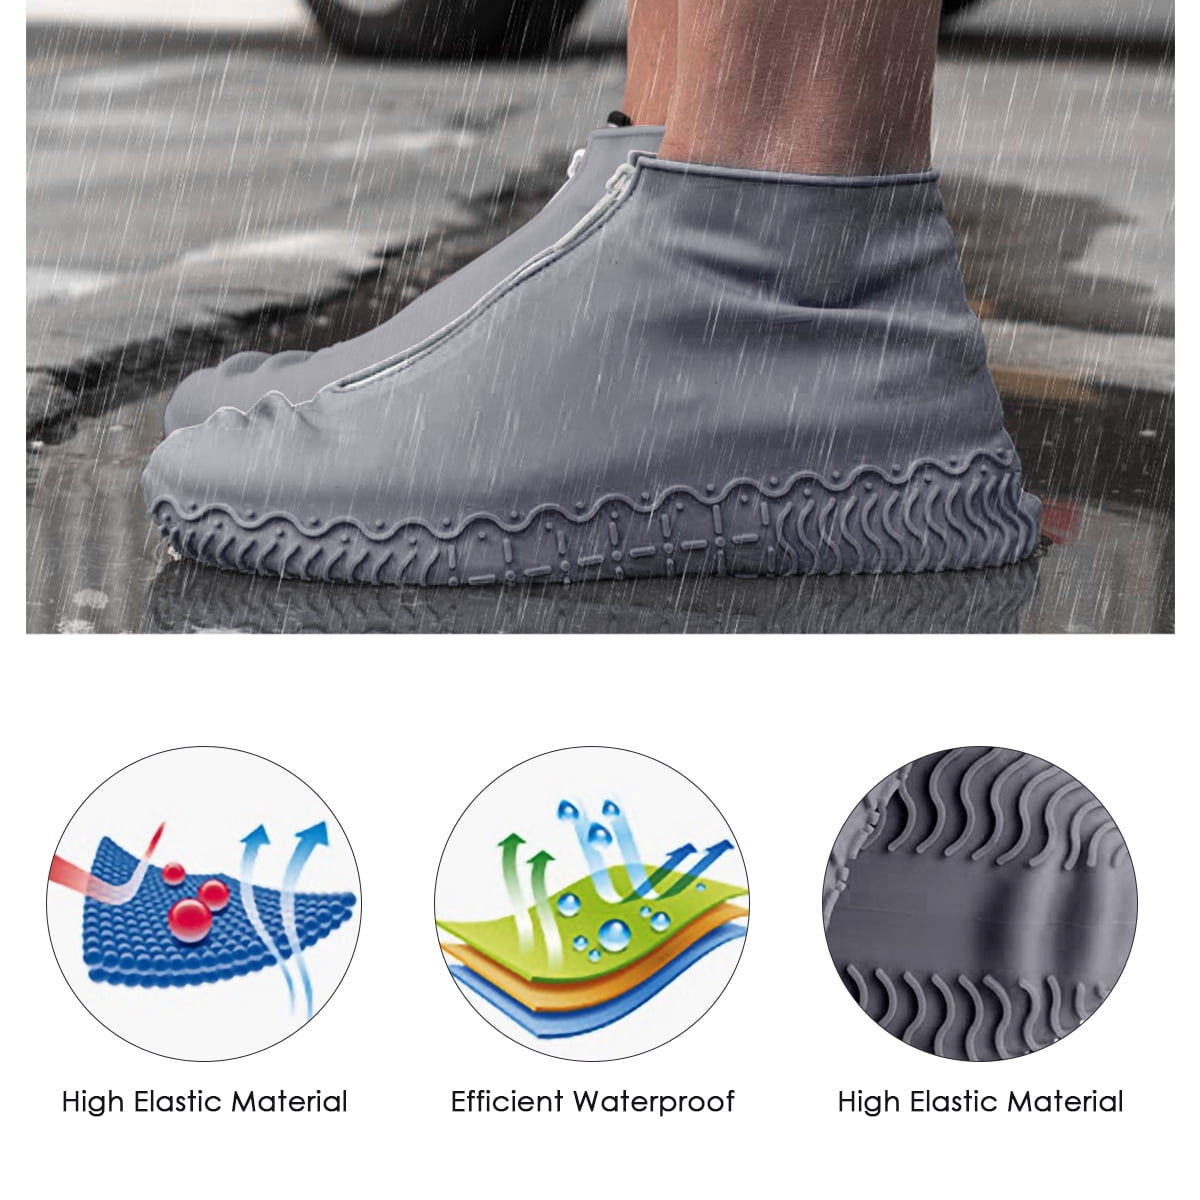 Rehomy Waterproof Shoe Covers Reusable Folding Not-Slip Silicone Rain Shoe Covers with Zipper Outdoor Shoe Protectors 1 Pair 